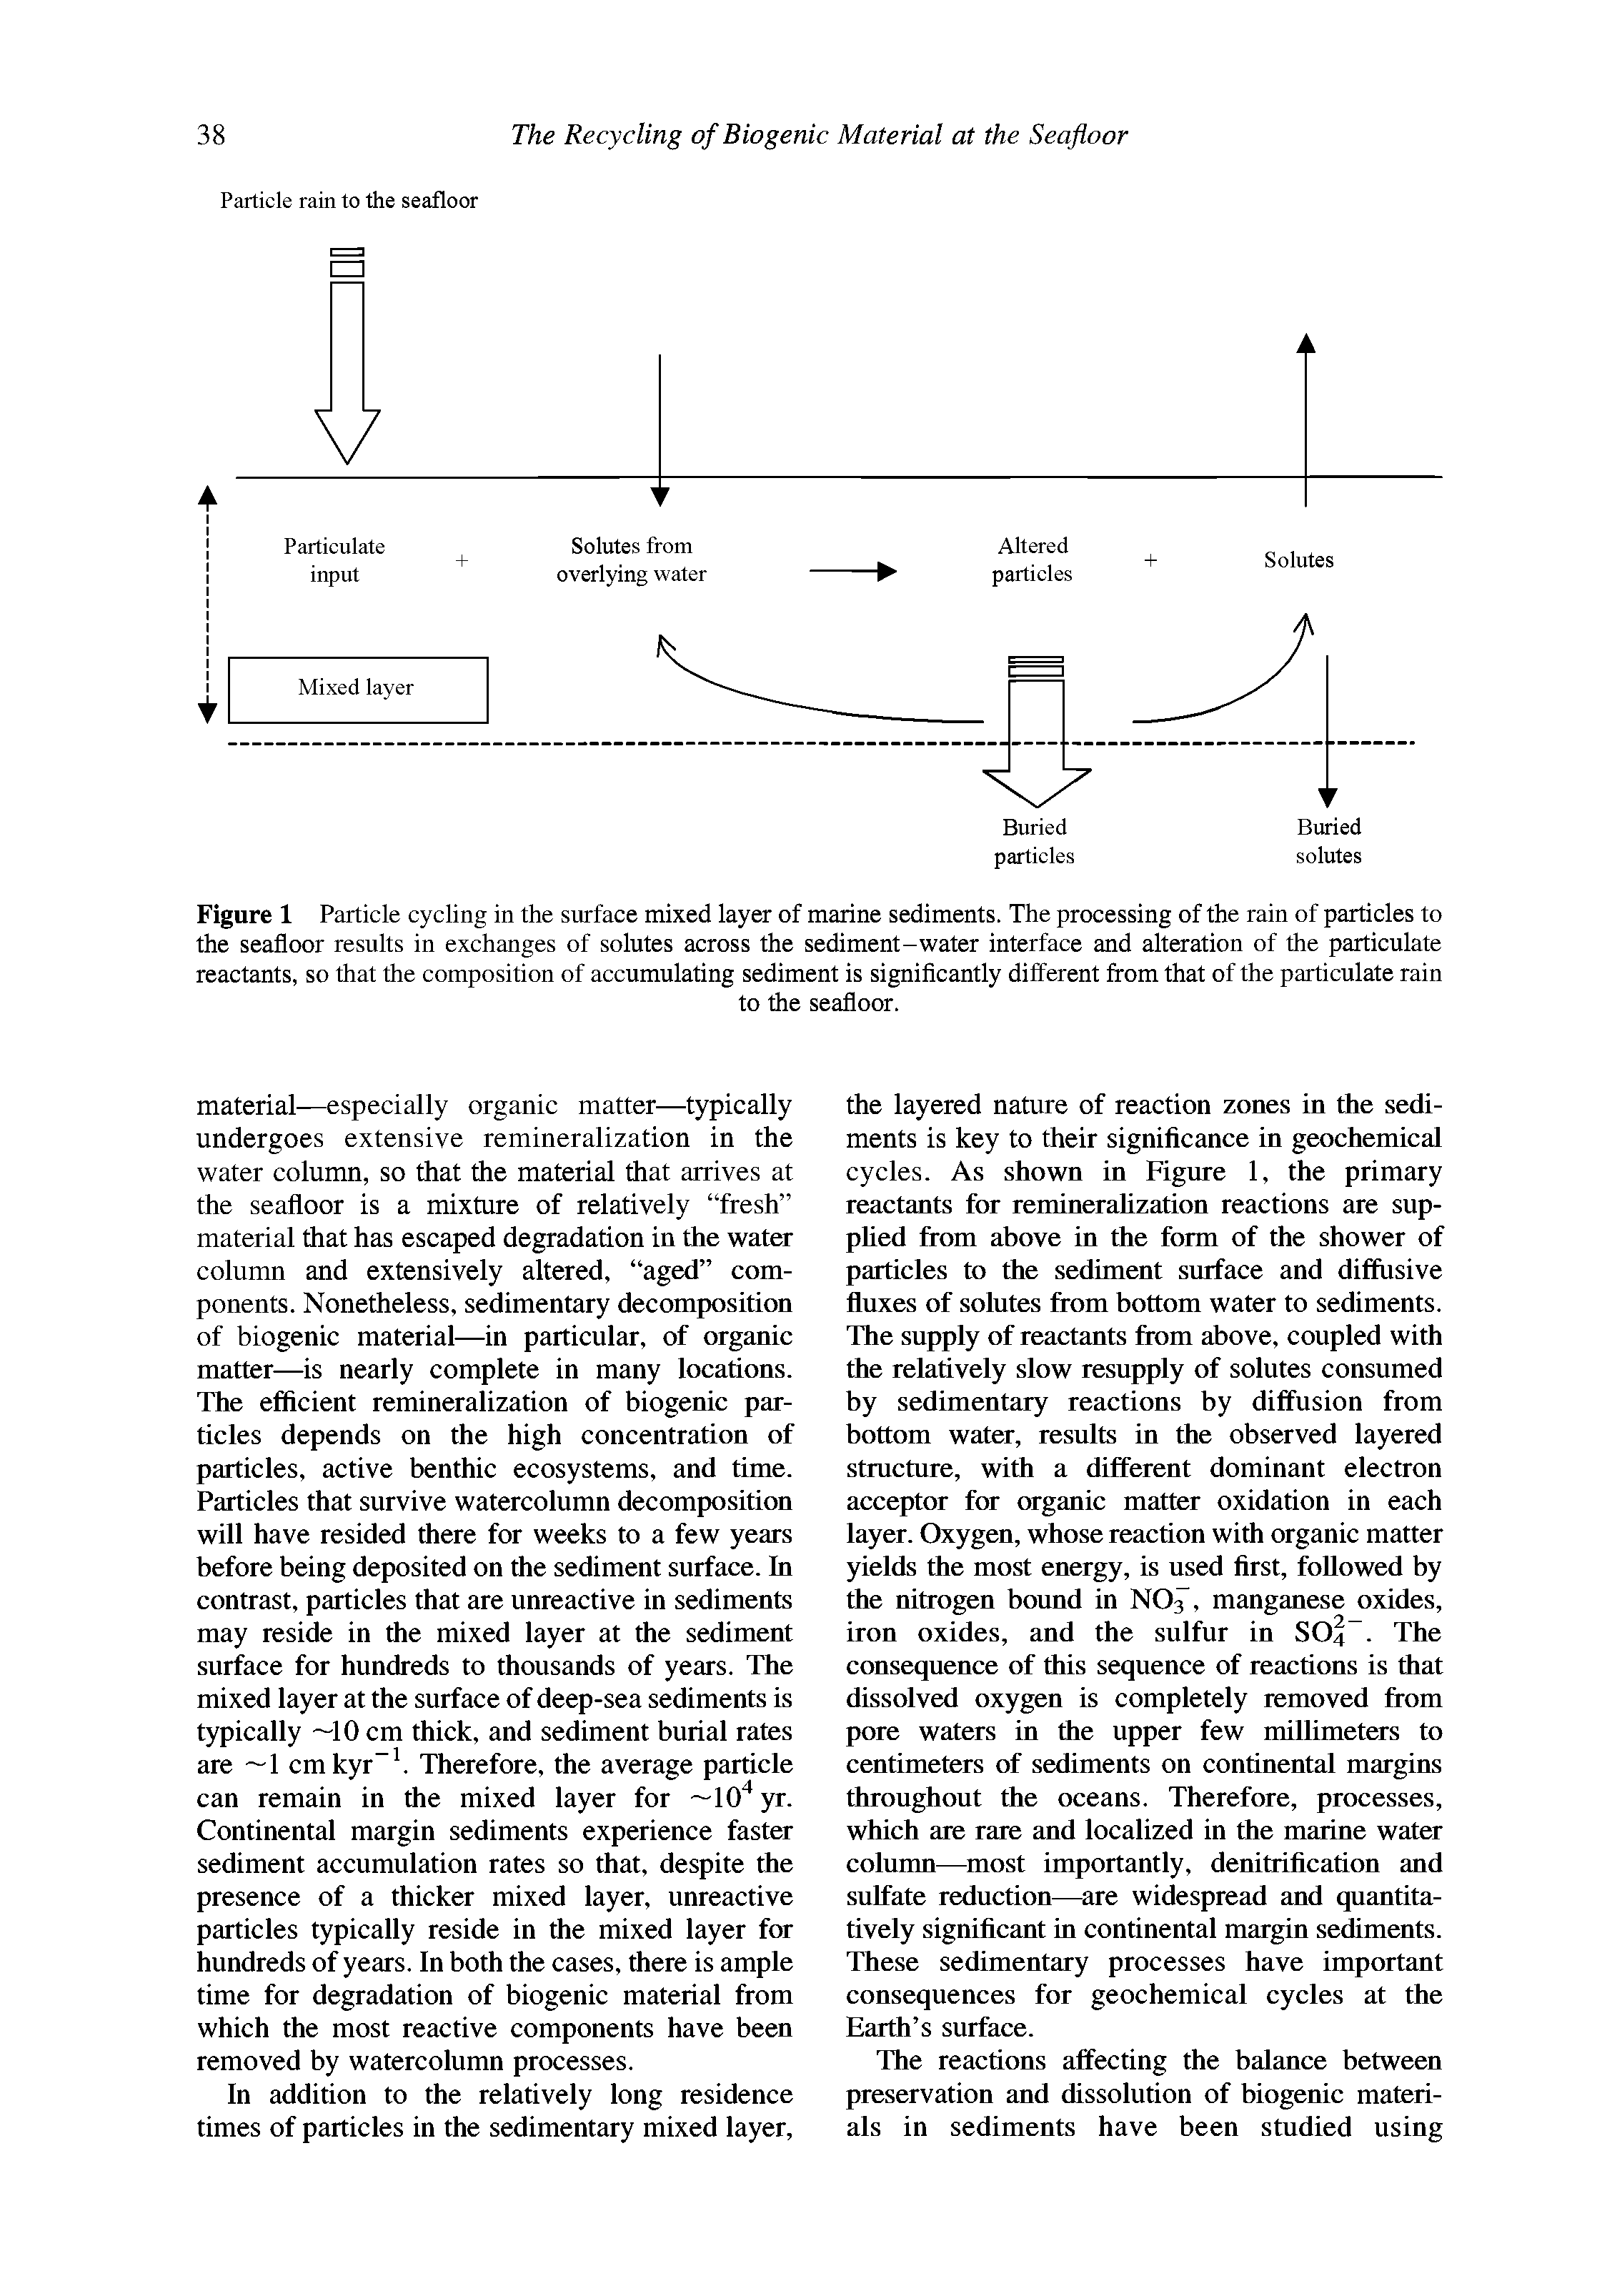 Figure 1 Particle cycling in the surface mixed layer of marine sediments. The processing of the rain of particles to the seafloor results in exchanges of solutes across the sediment-water interface and alteration of the particulate reactants, so that the composition of accumulating sediment is signiflcantly different from that of the particulate rain...